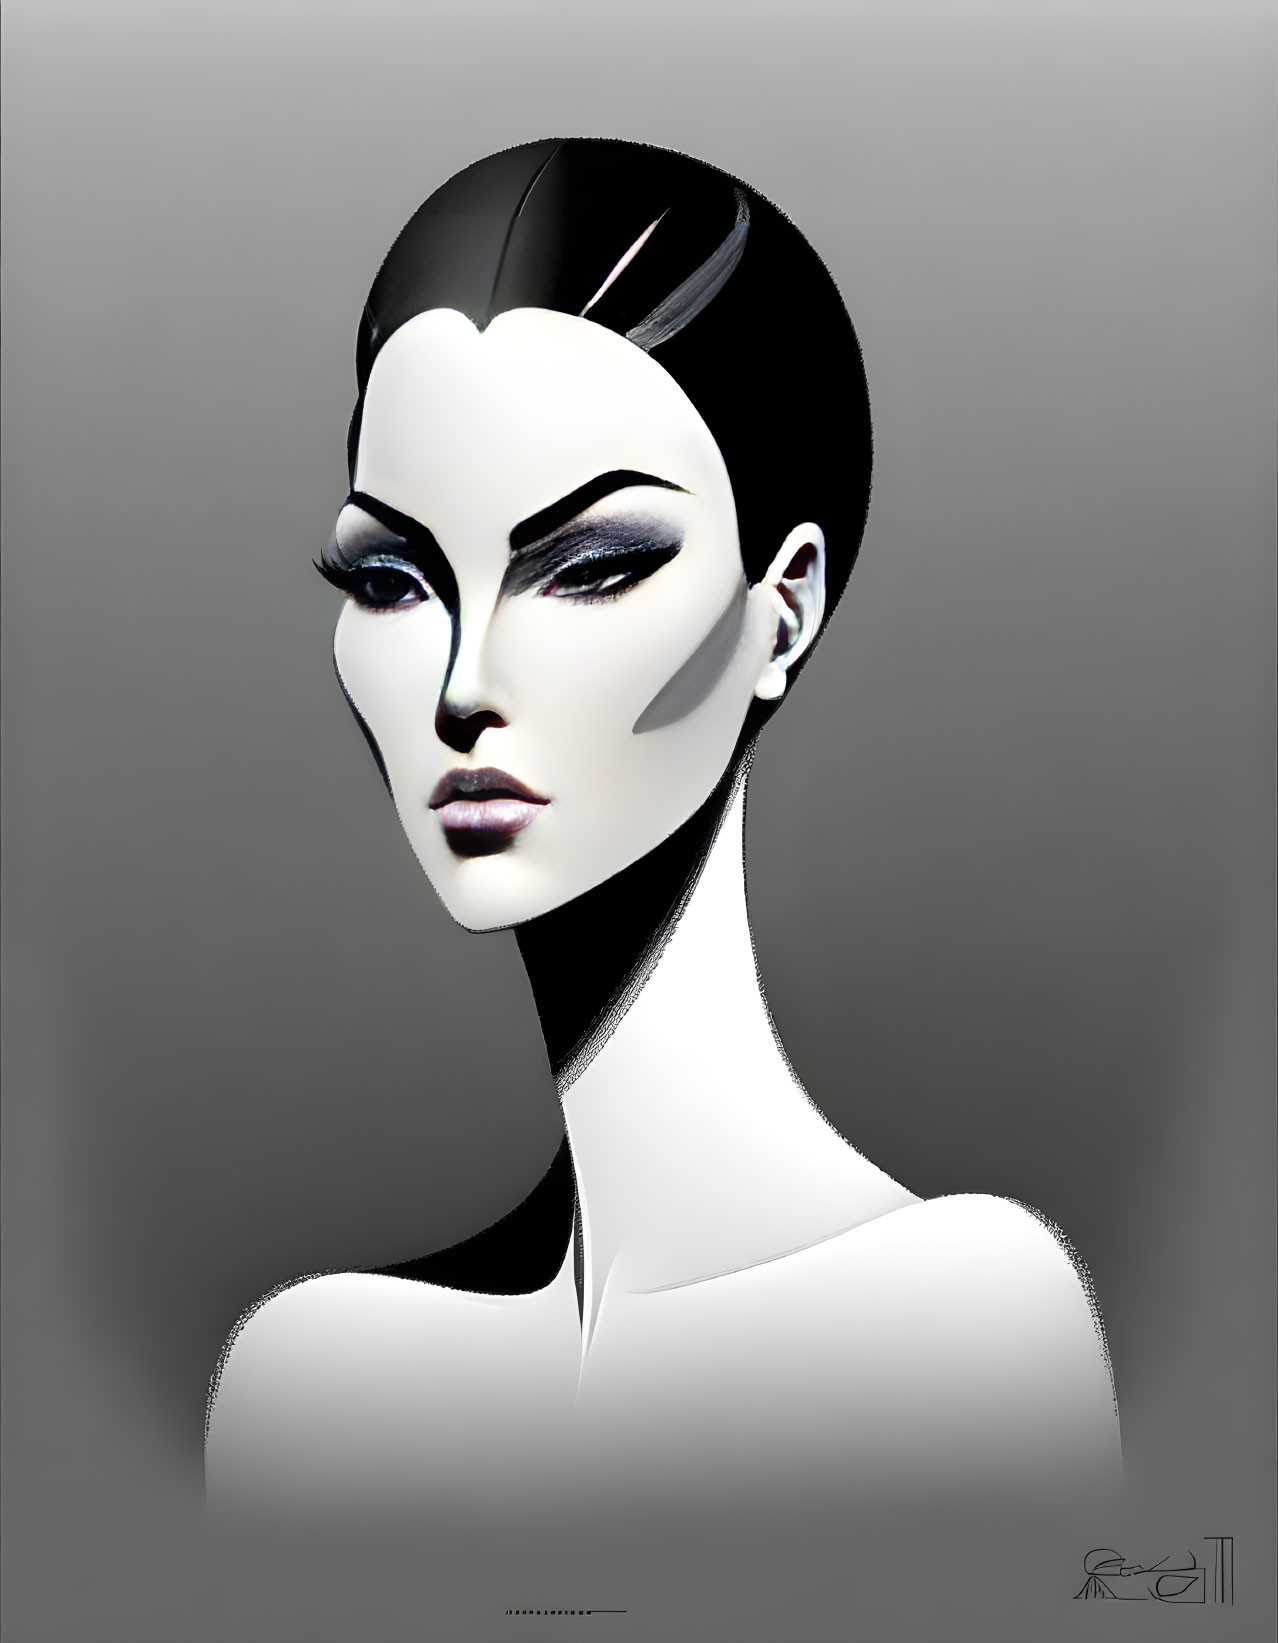 Illustration of stylized female figure with bold features on gradient background